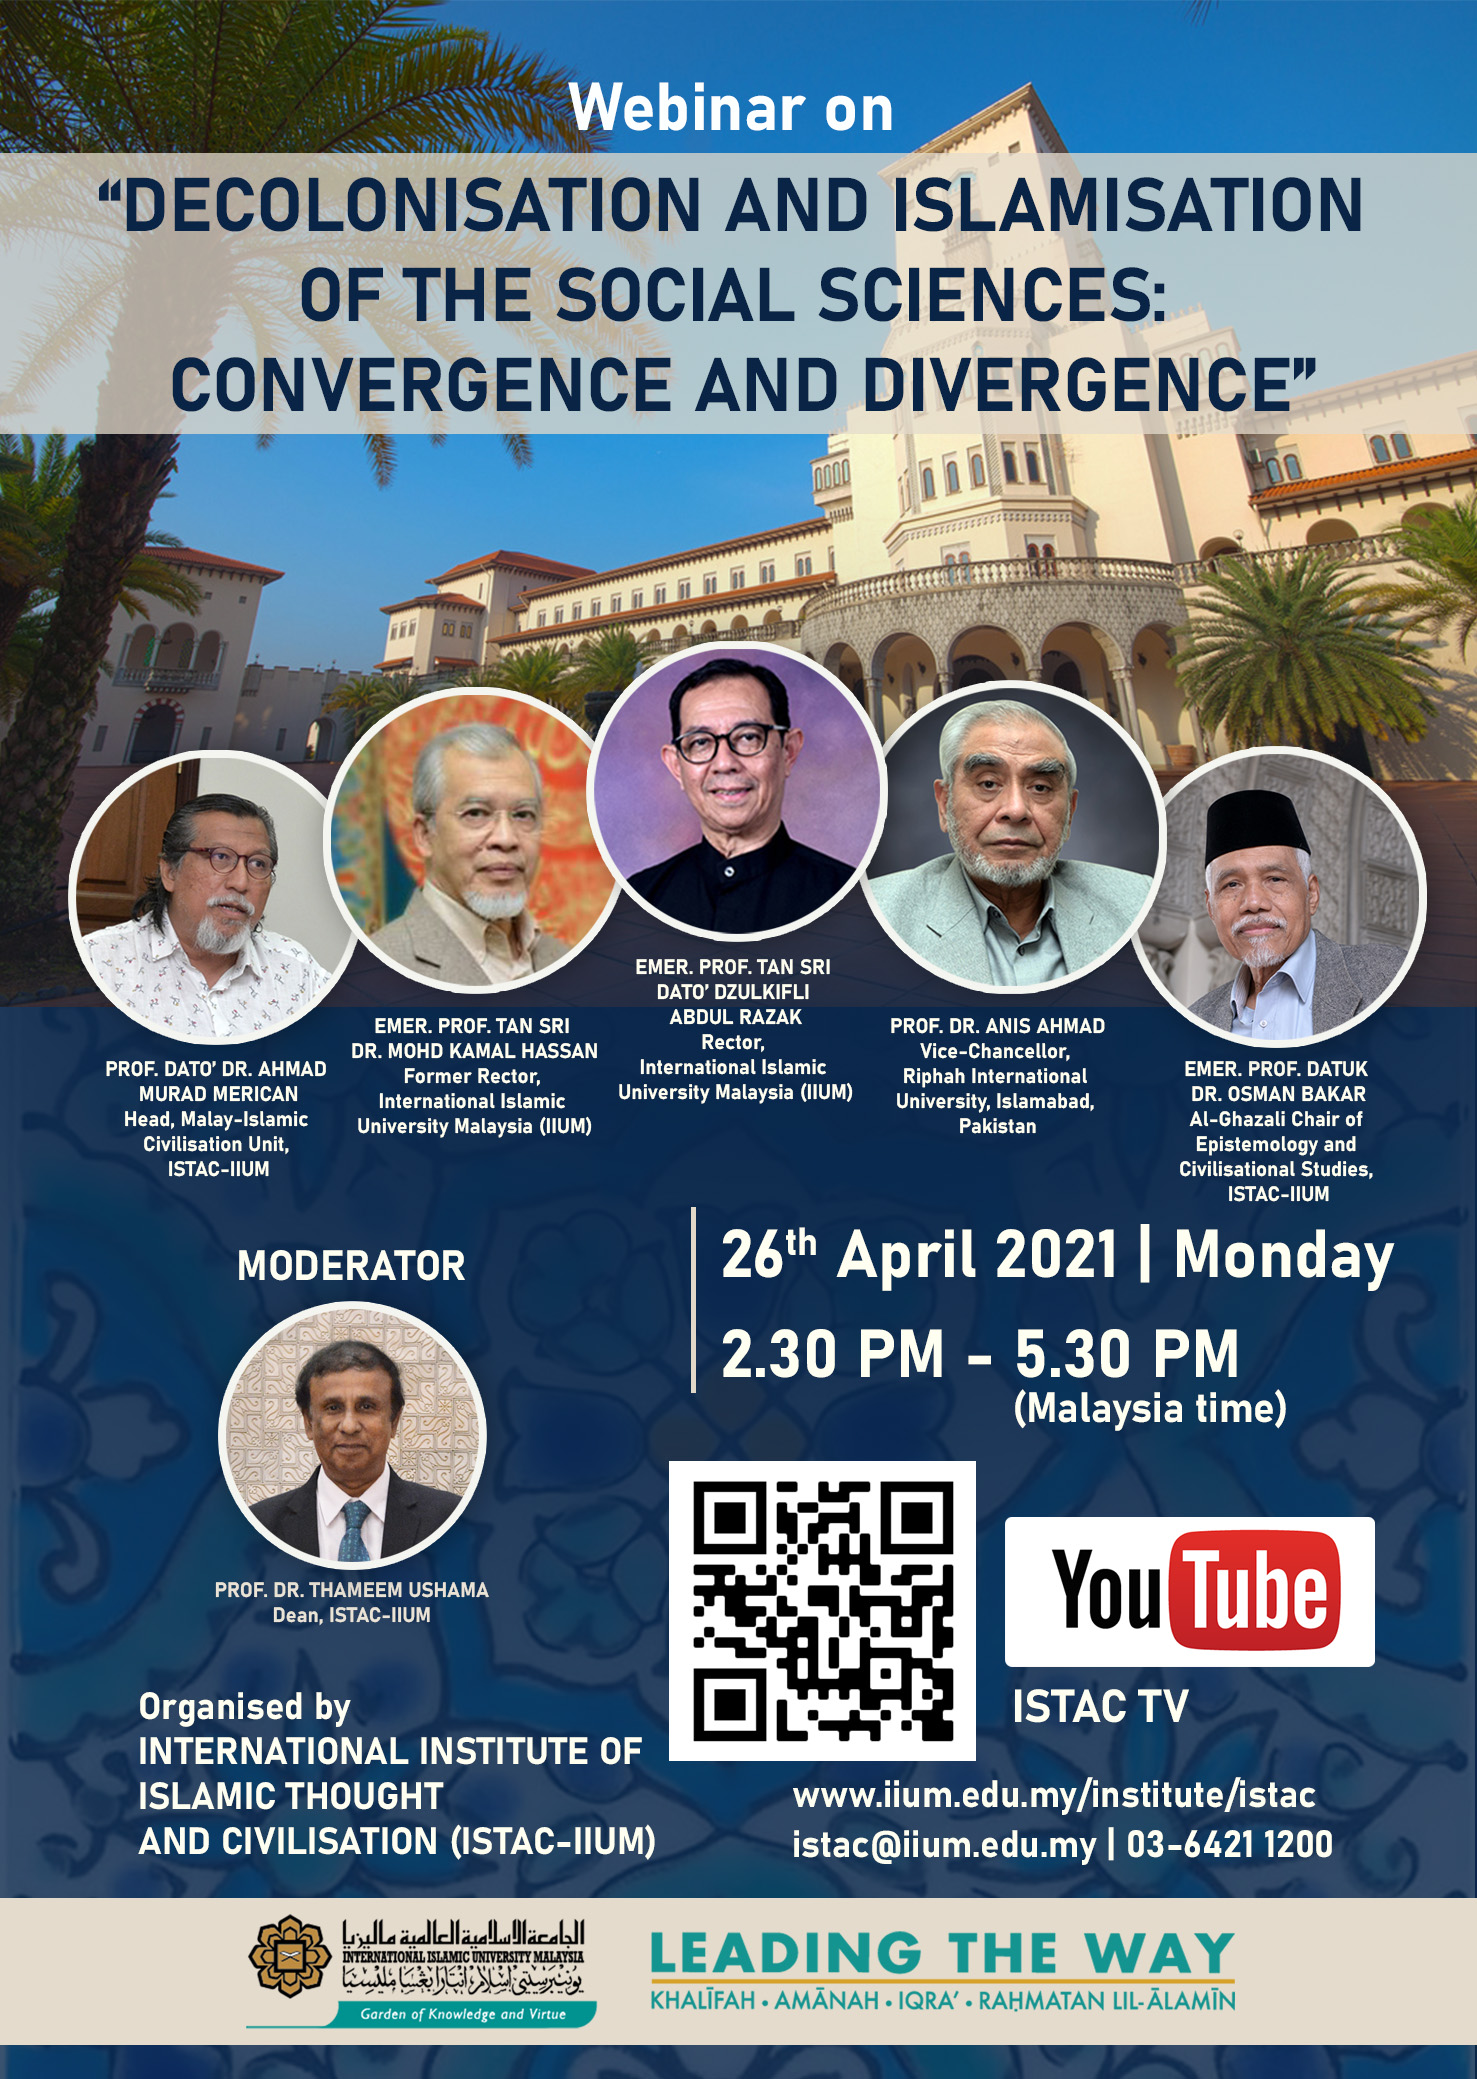 WEBINAR ON DECOLONISATION AND ISLAMISATION OF THE SOCIAL SCIENCES : CONVERGENCE AND DIVERGENCE